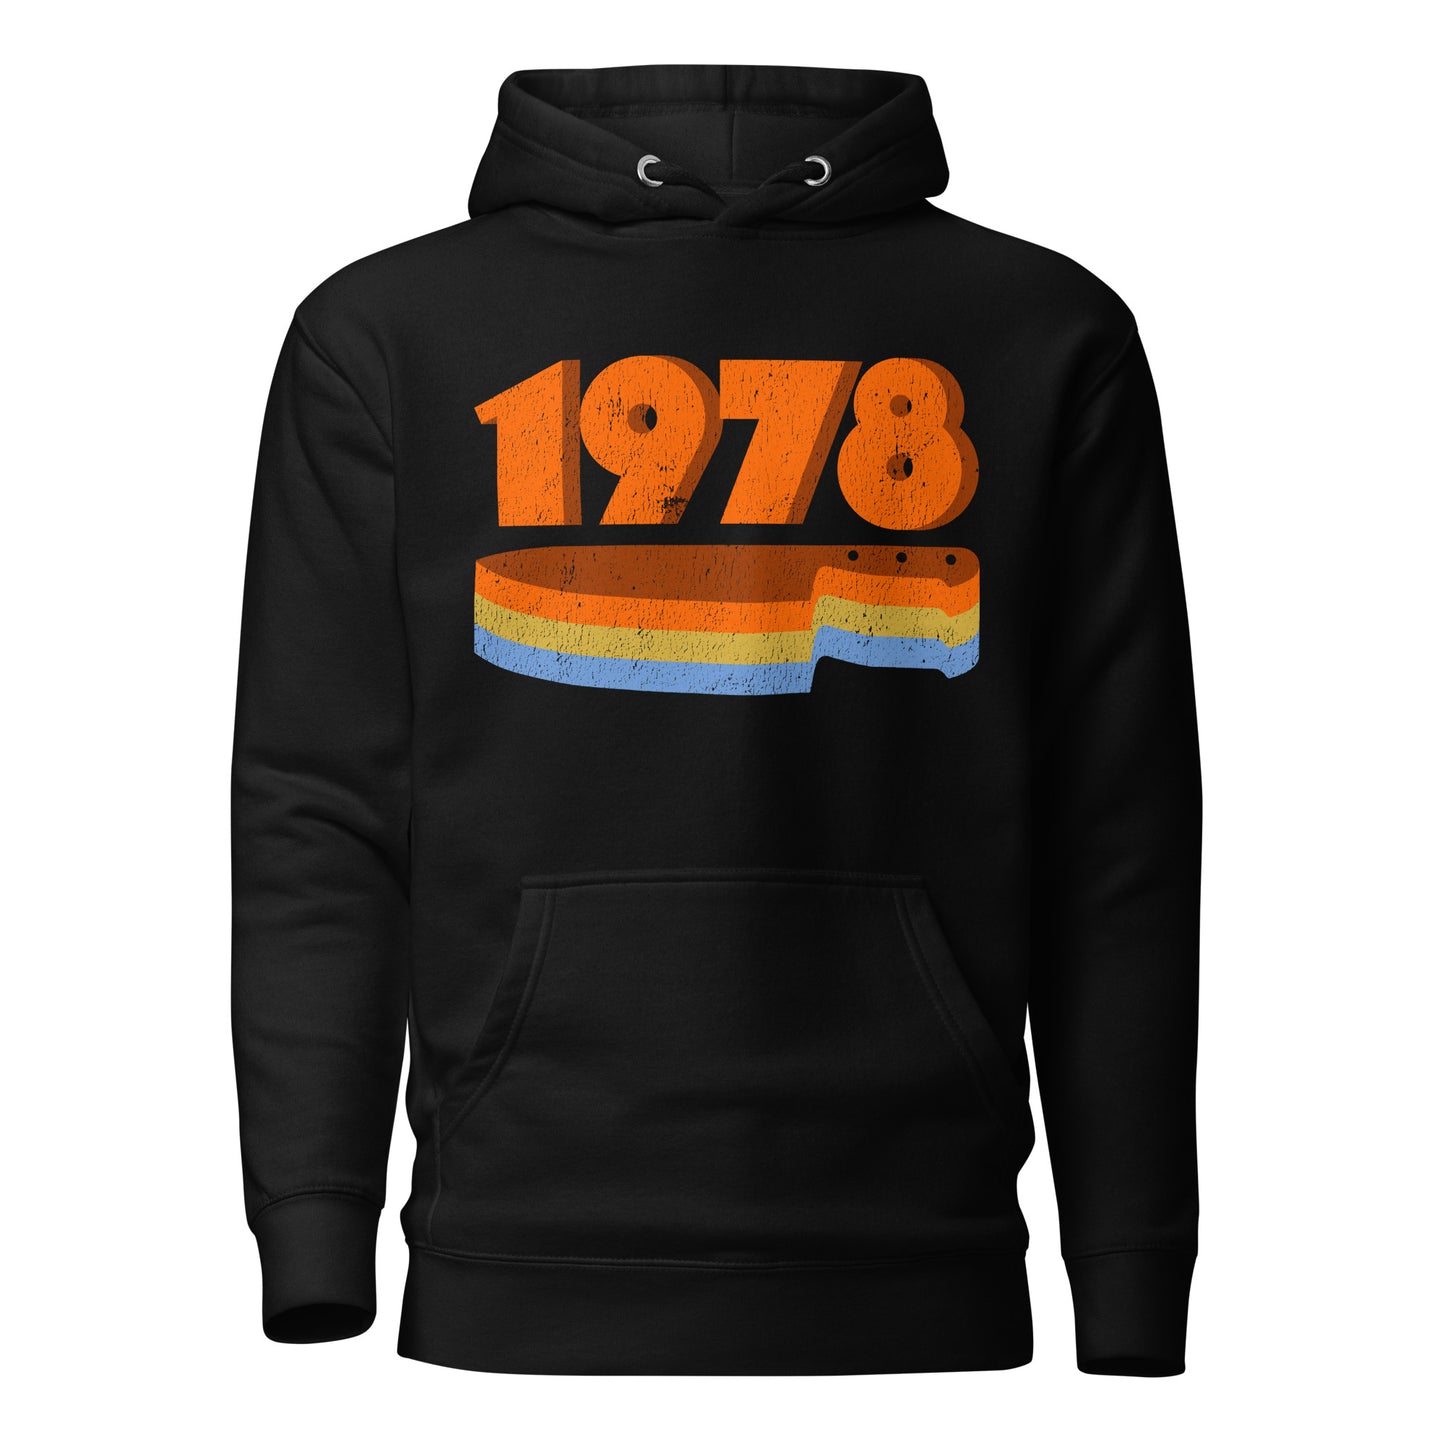 October 31st 1978 pullover hoodie